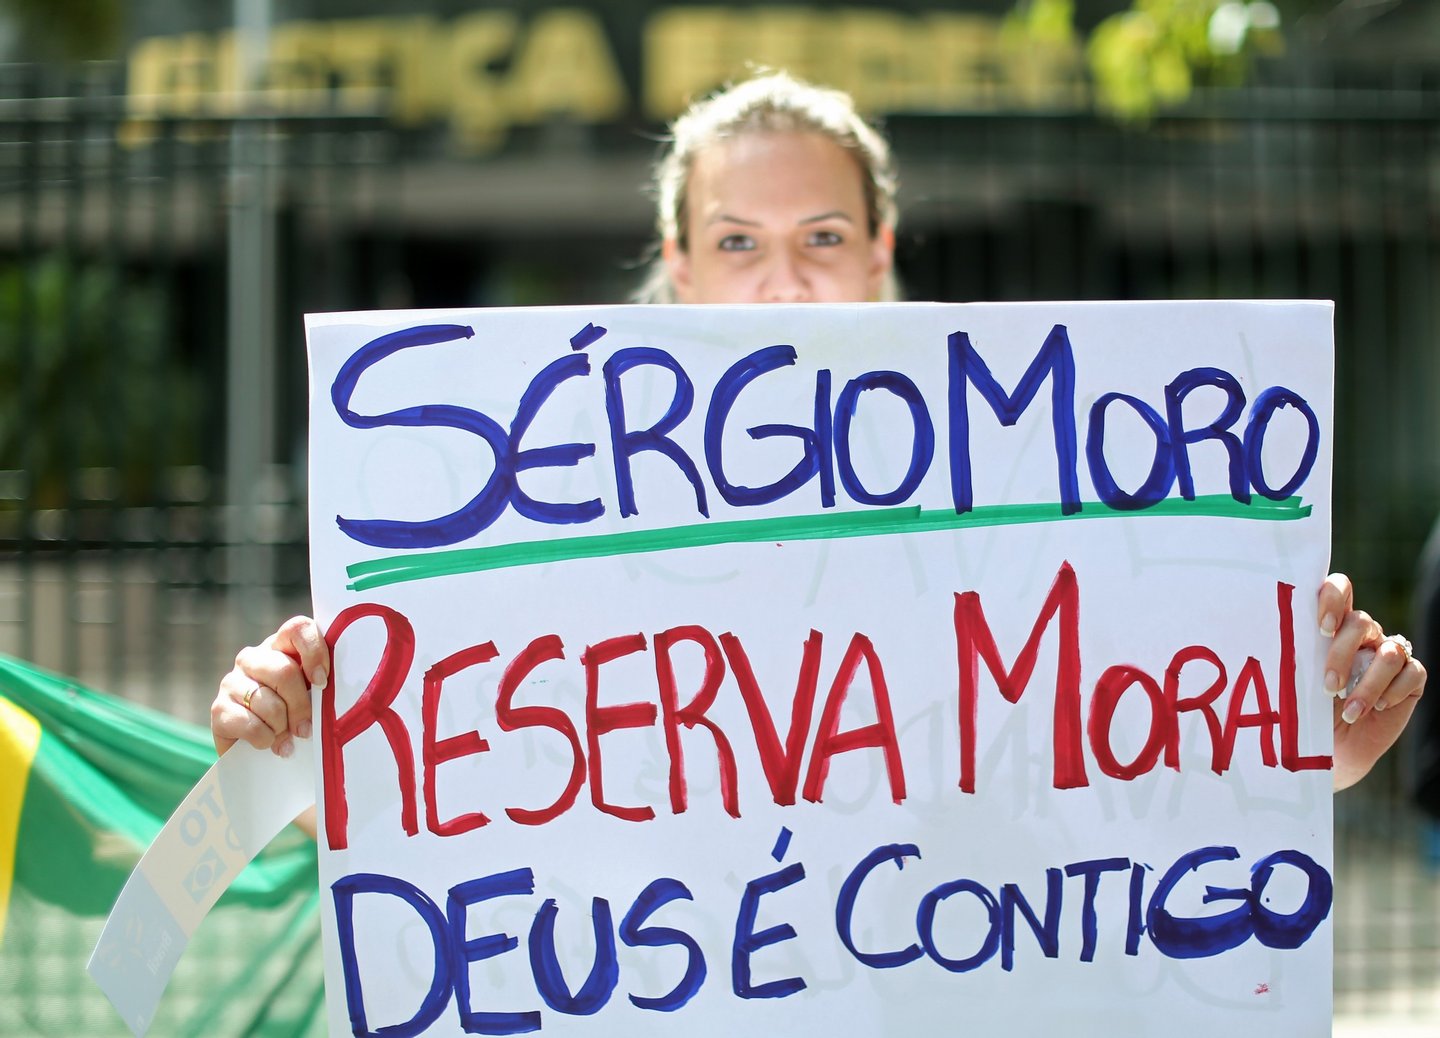 A demonstrator protests against corruption in front of the Federal Justice Palace in Curitiba, Brazil on March 17, 2016. Brazil's former president Luiz Inacio Lula da Silva was sworn in Thursday as chief of staff to his embattled successor Dilma Rousseff amid angry protests from opponents who accuse him of trying to dodge corruption charges. Lula took office in a tumultuous scene at the presidential palace, where a protester shouted "Shame!" and the ex-president's supporters chanted slogans accusing their opponents of seeking a "coup". However hours after Lula's appointment, federal judge Sergio Moro, who is heading a probe into the Petrobras scandal, ordered the release of a call recorded by police suggesting darker motives. AFP PHOTO / HEULER ANDREY / AFP / Heuler Andrey (Photo credit should read HEULER ANDREY/AFP/Getty Images)